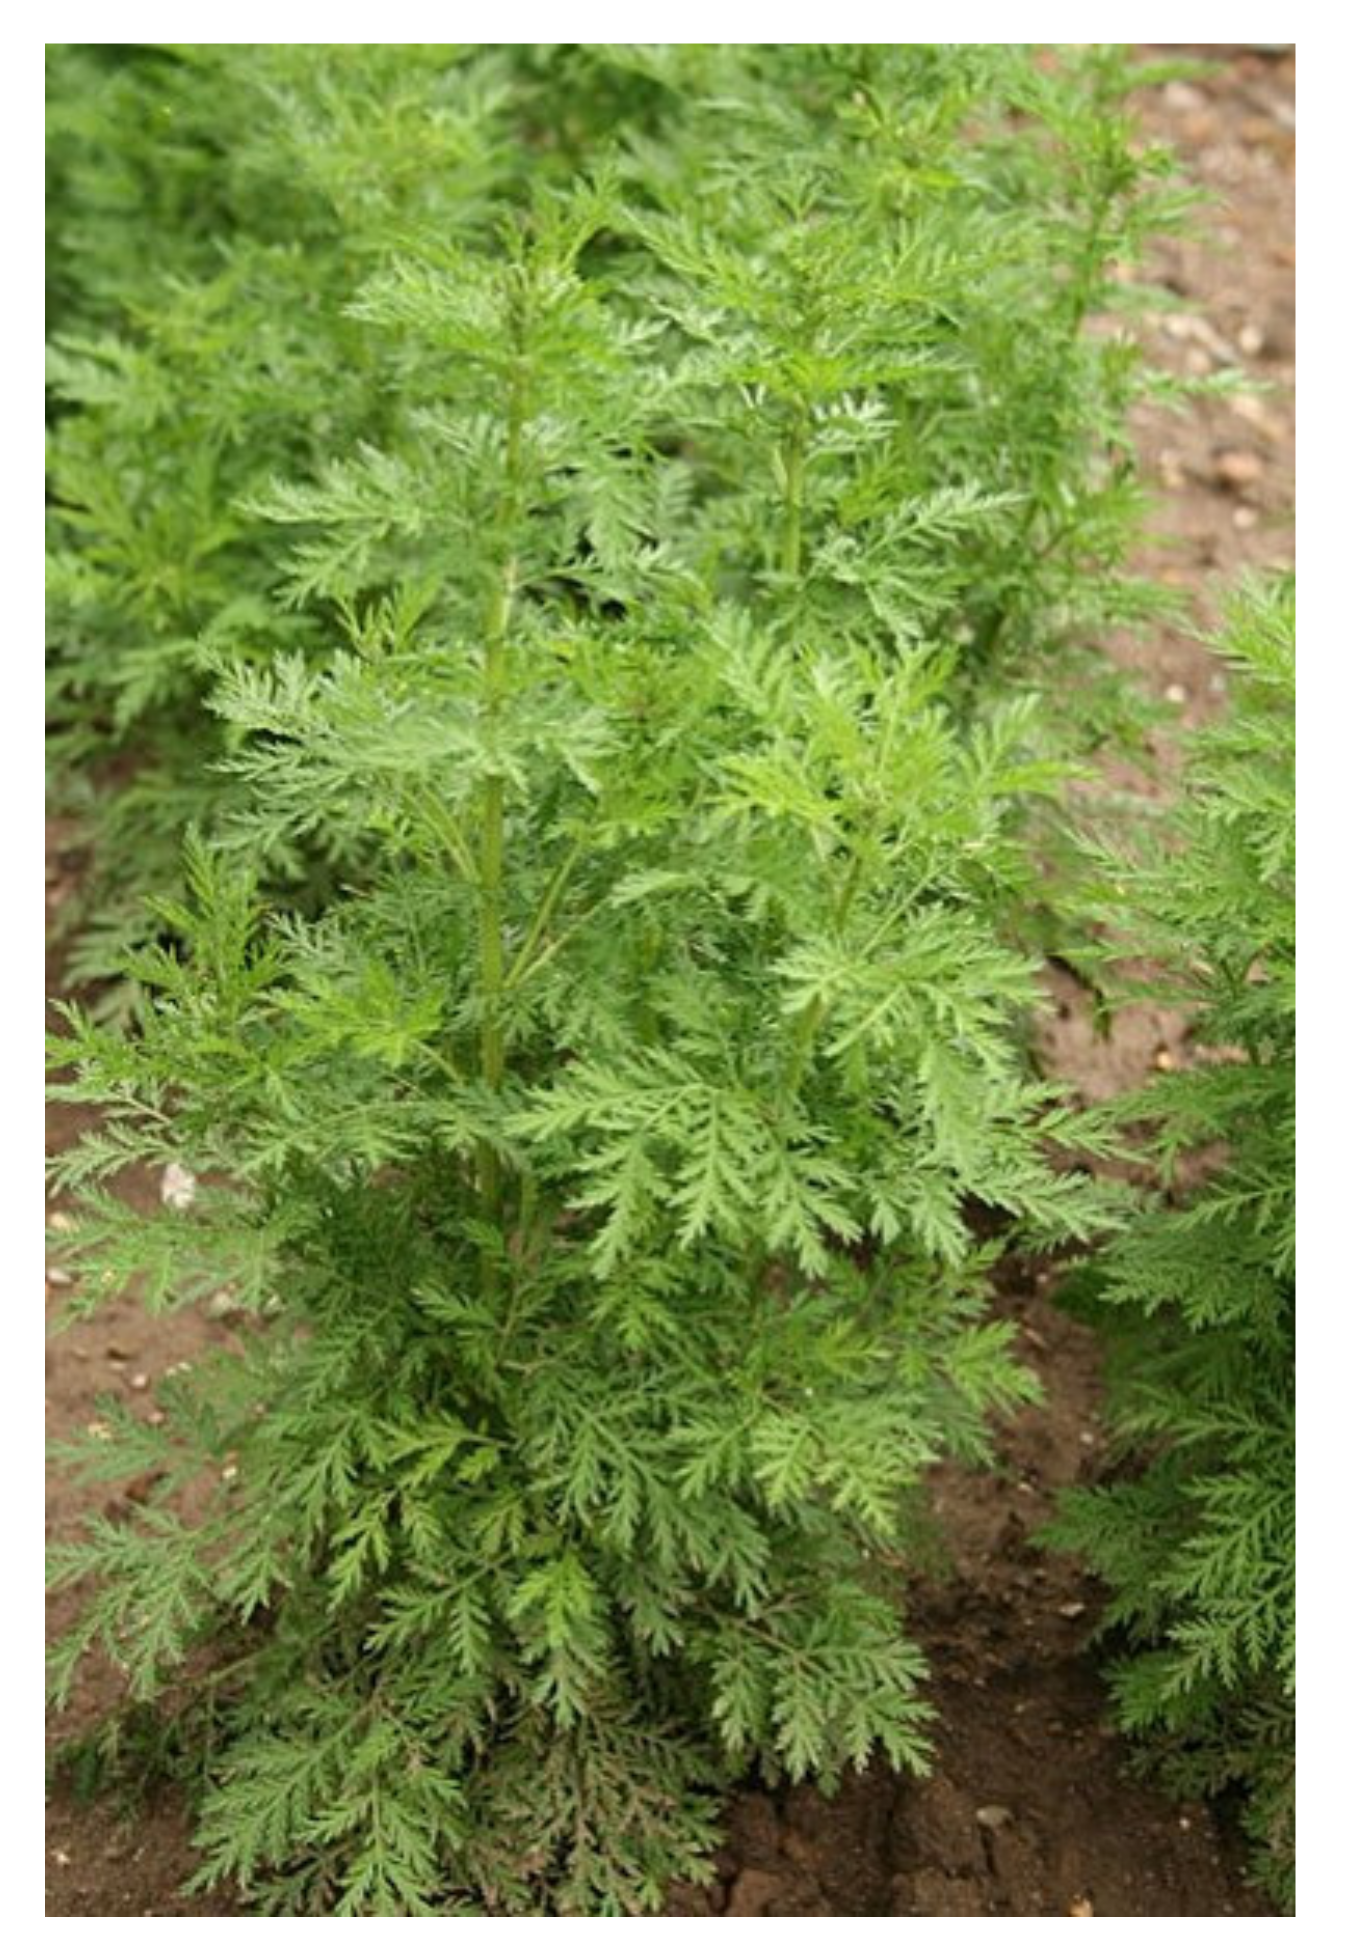 Extracts from artemisia annua plant found to be active against